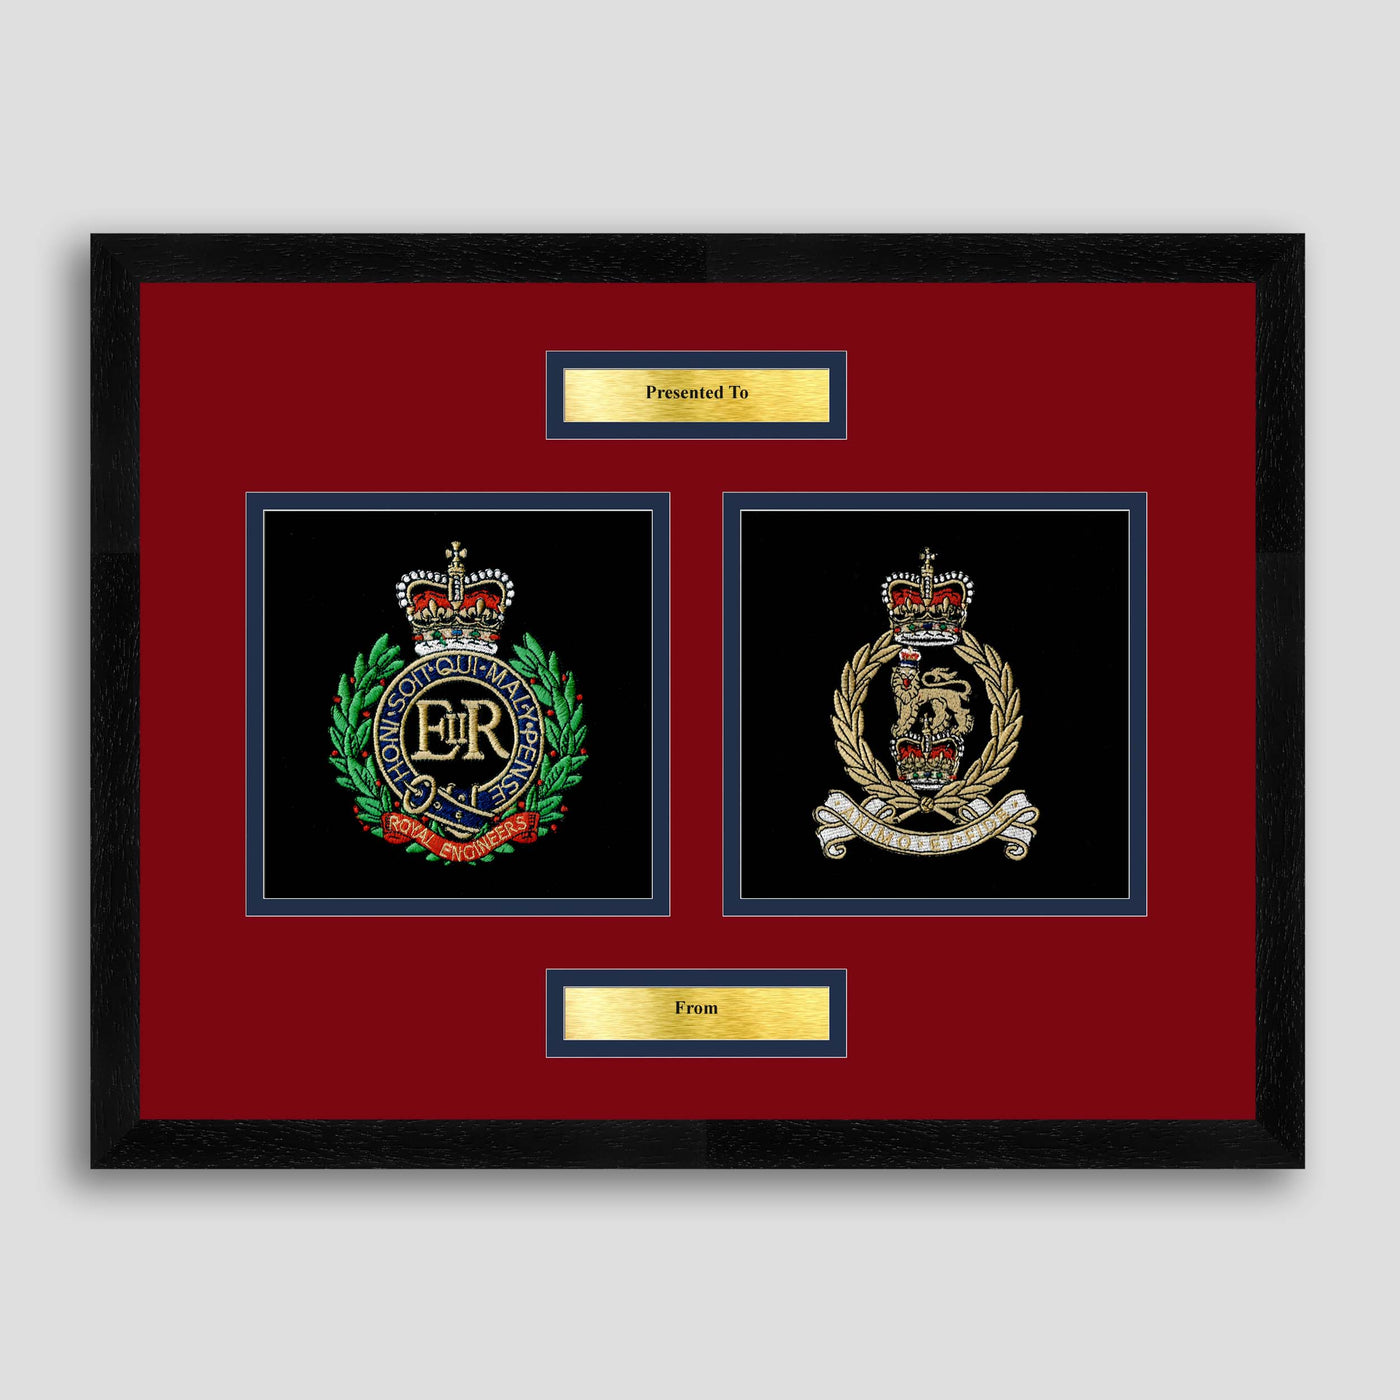 Royal Engineers & AGC (SPS) Framed Military Embroidery Presentation